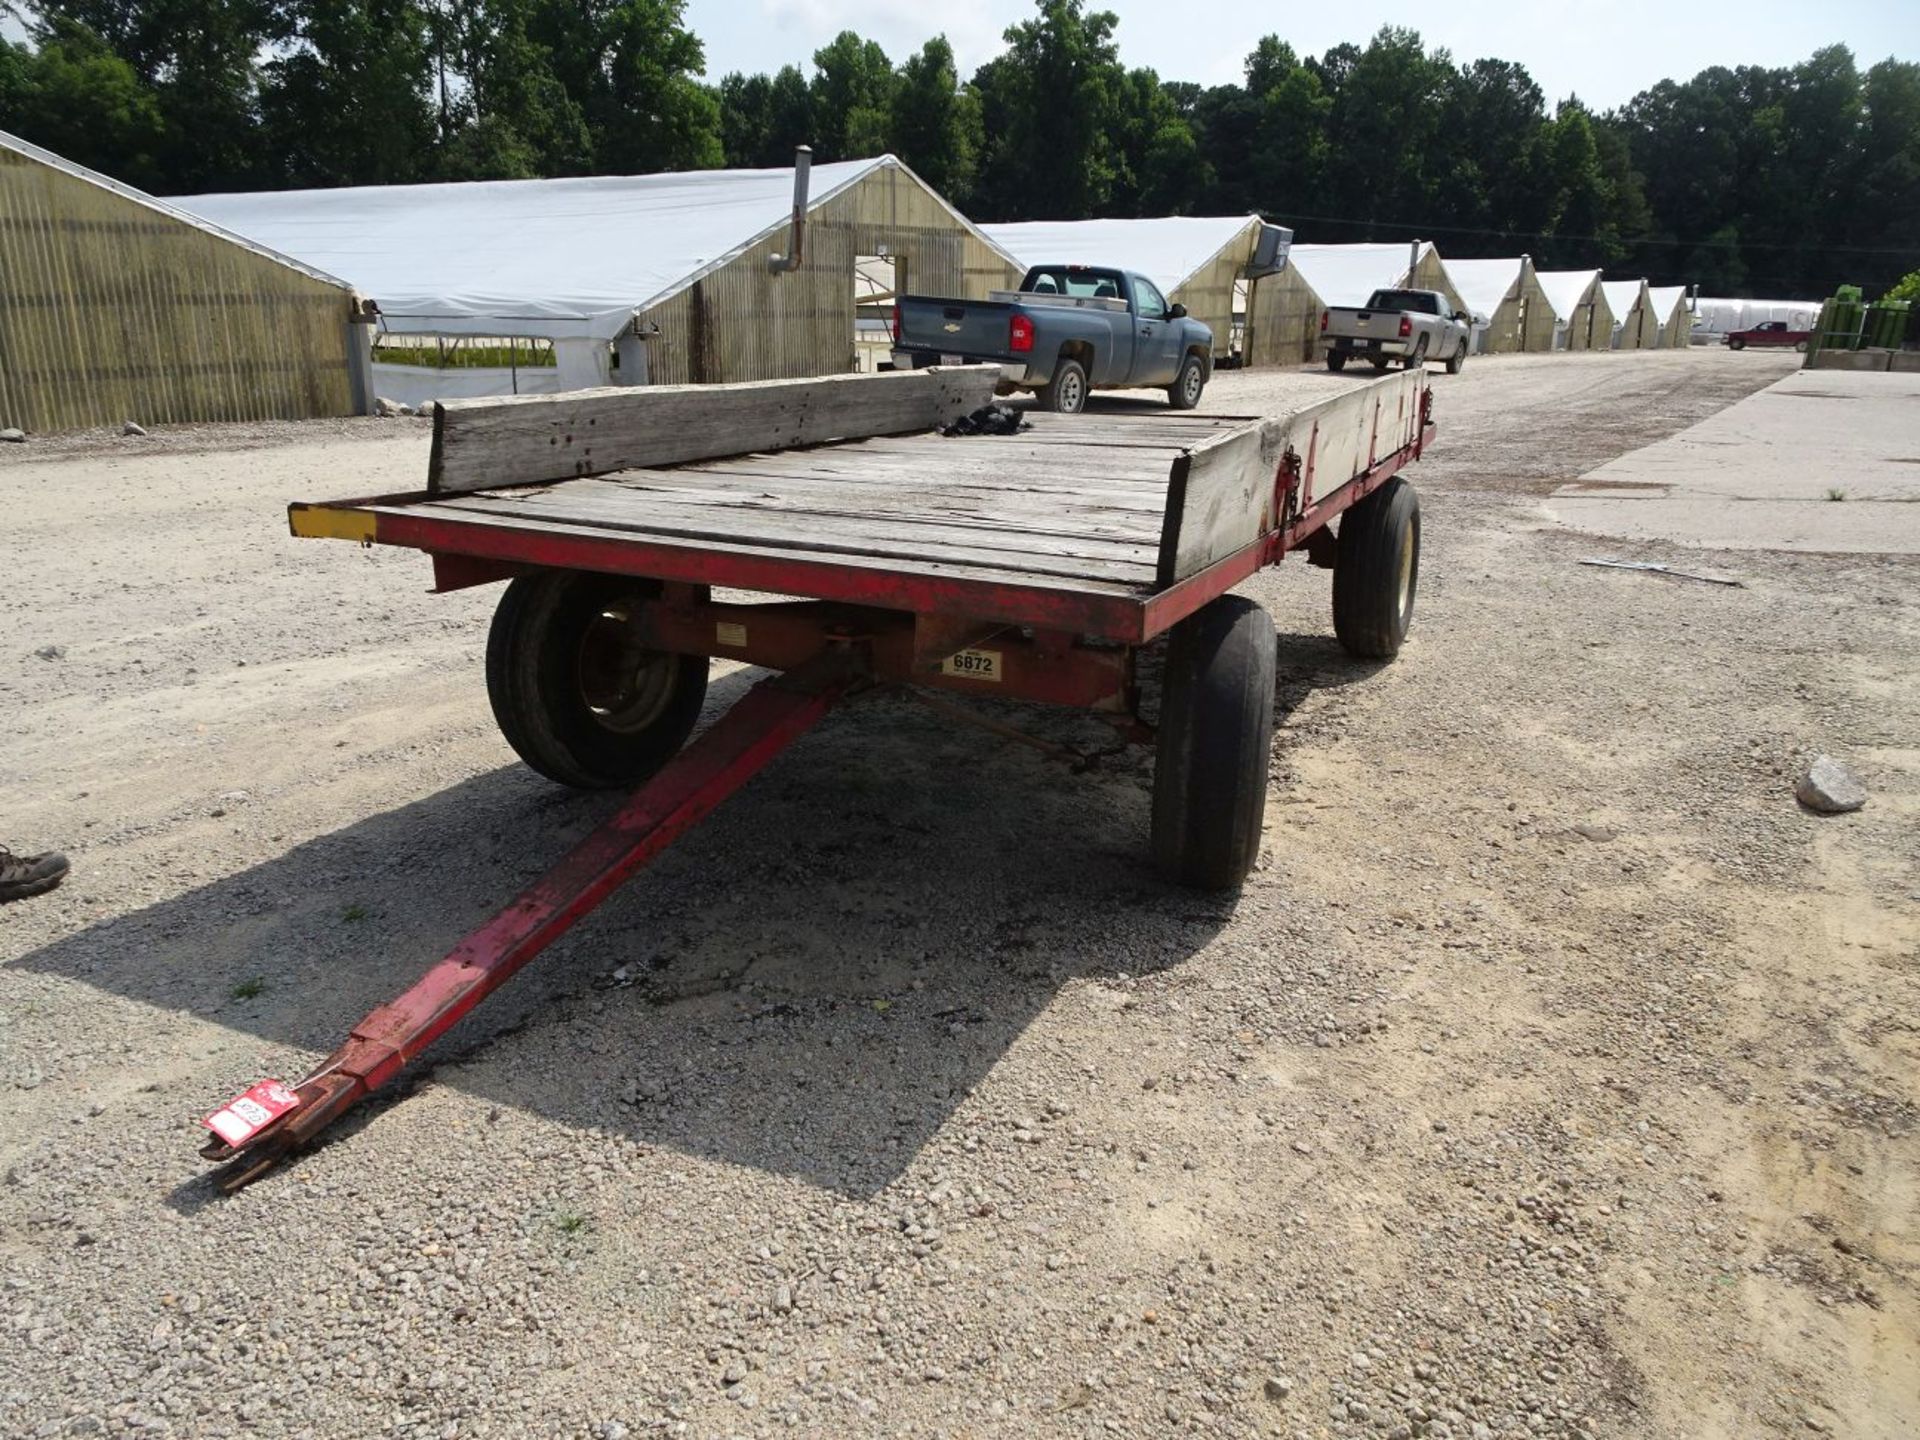 KORY 6872 STEERABLE WAGON, 15' BED, 11L-15 TIRES, WITH HINGED WOOD SIDES (LOCATION: FARM C)